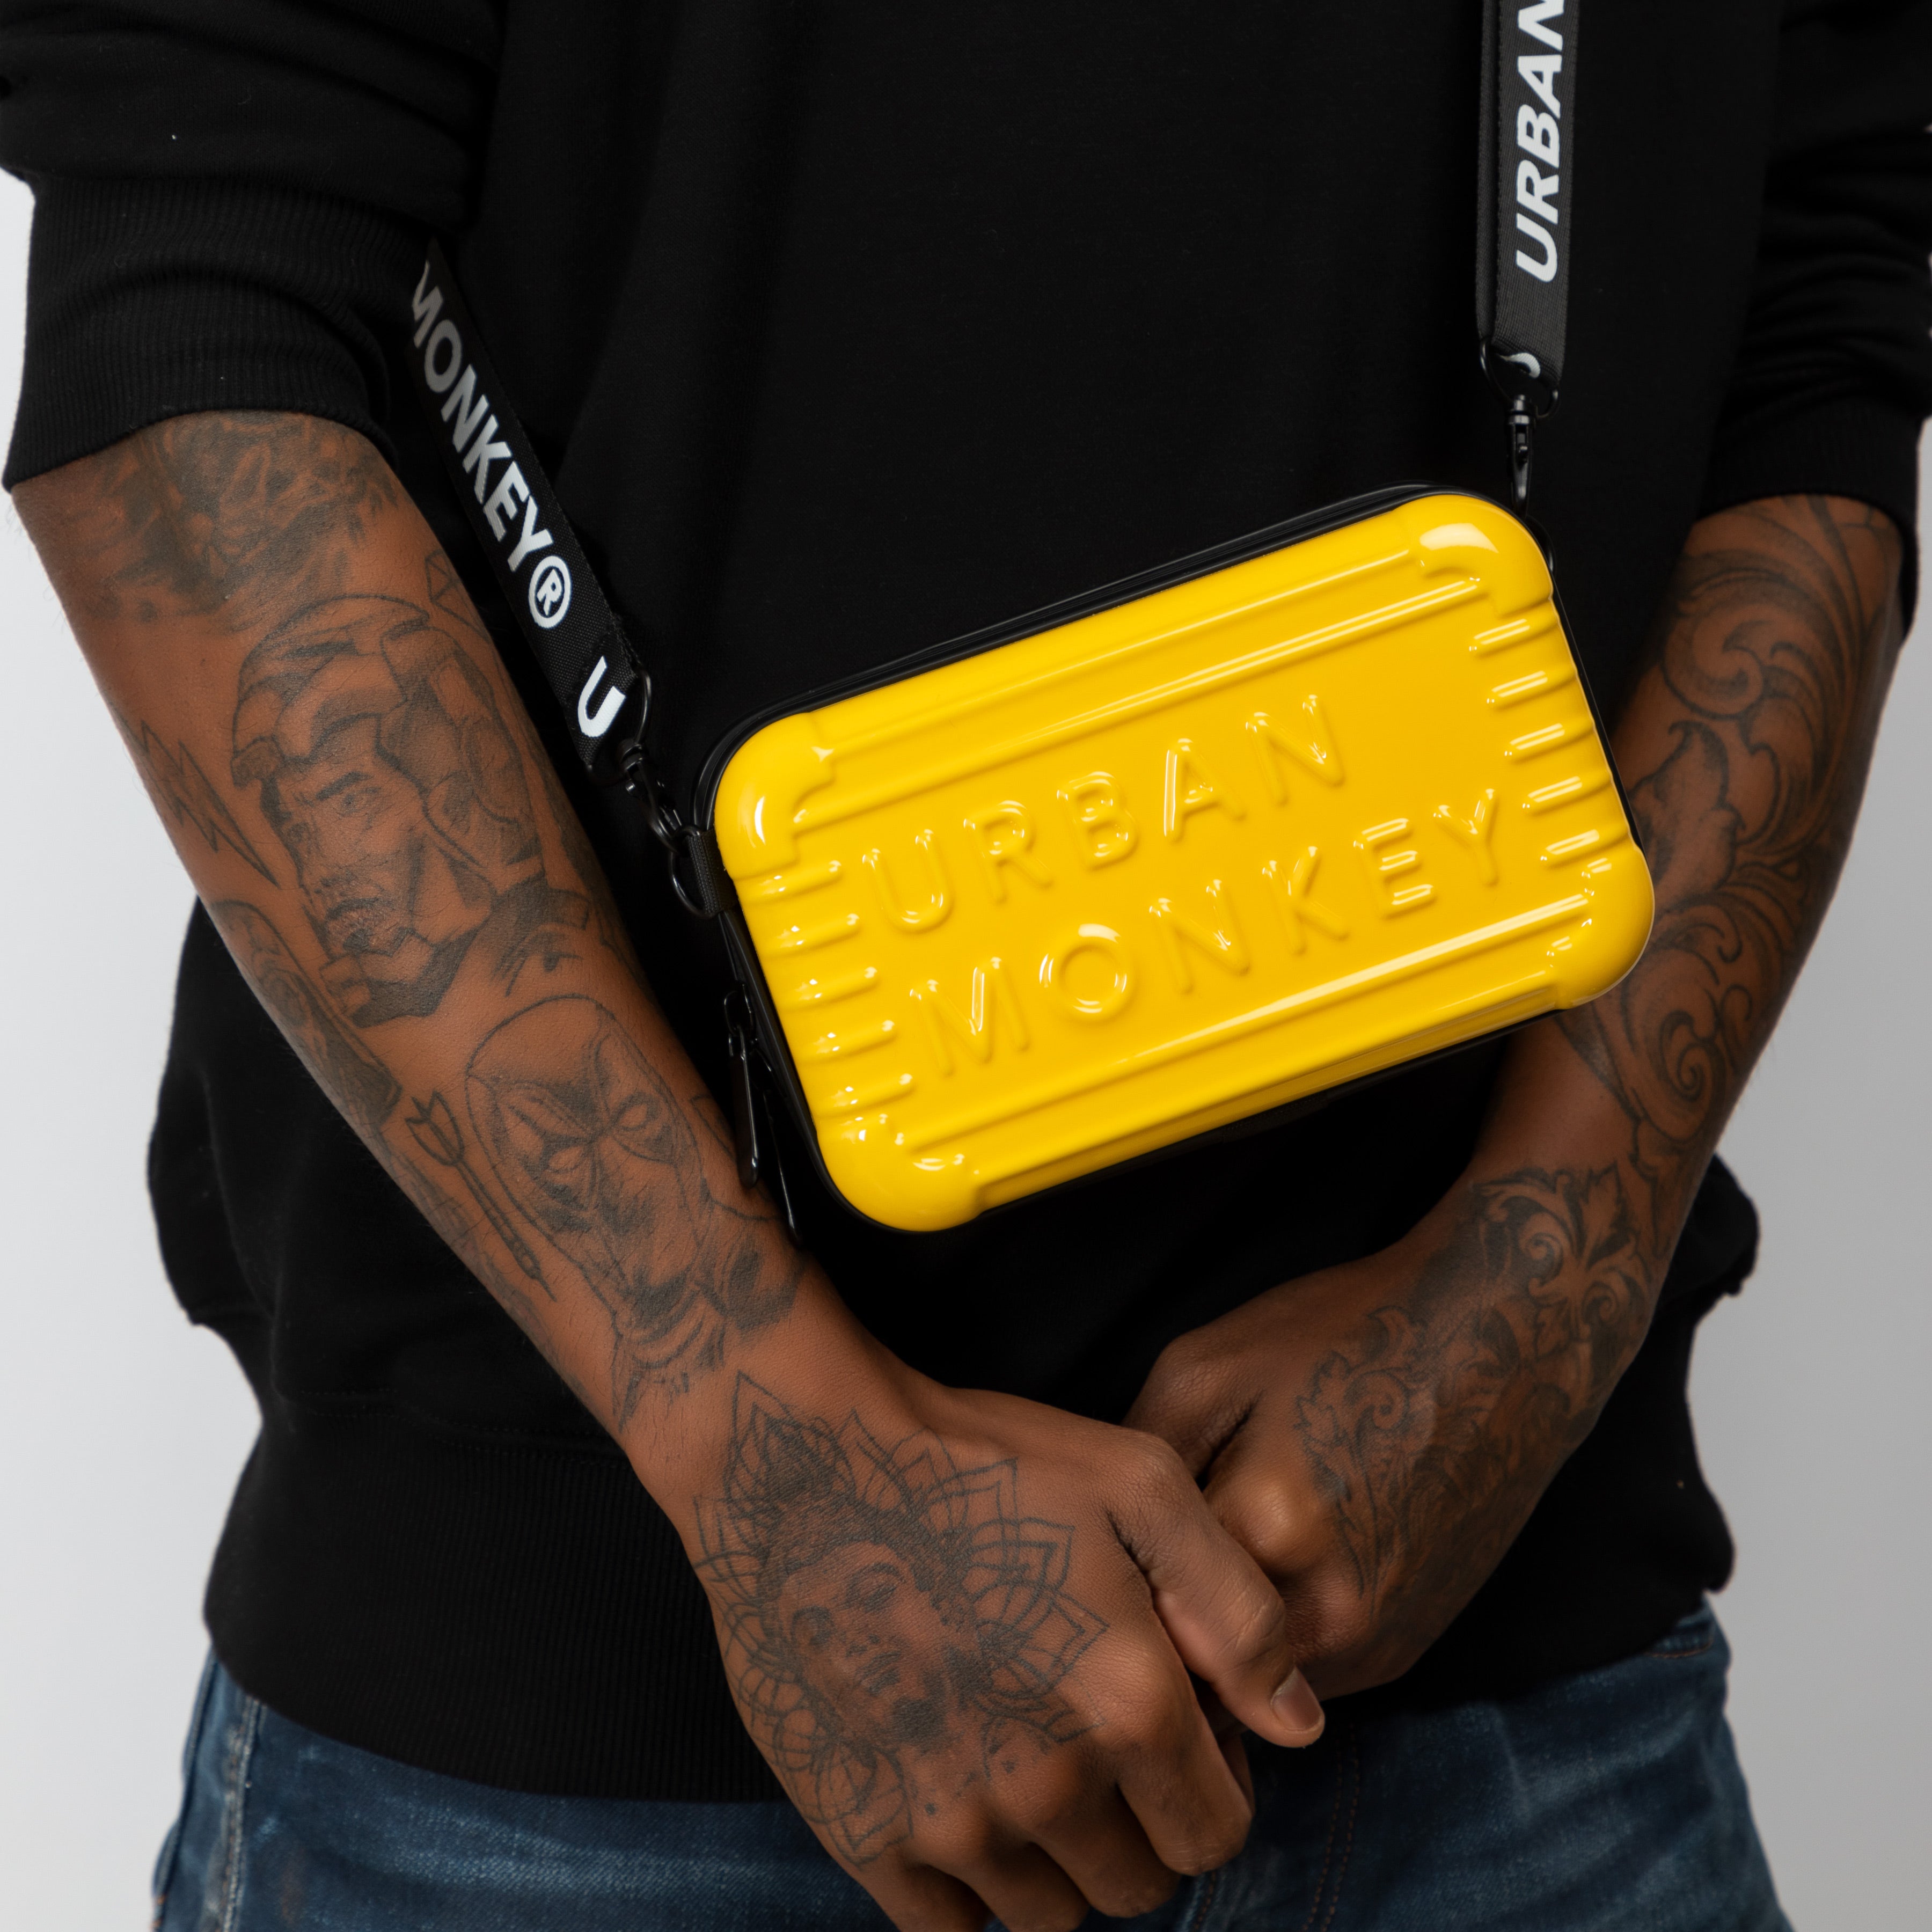 A Streetwear Must-Have⚡️⚡️  Sling bags by Urban Monkey 